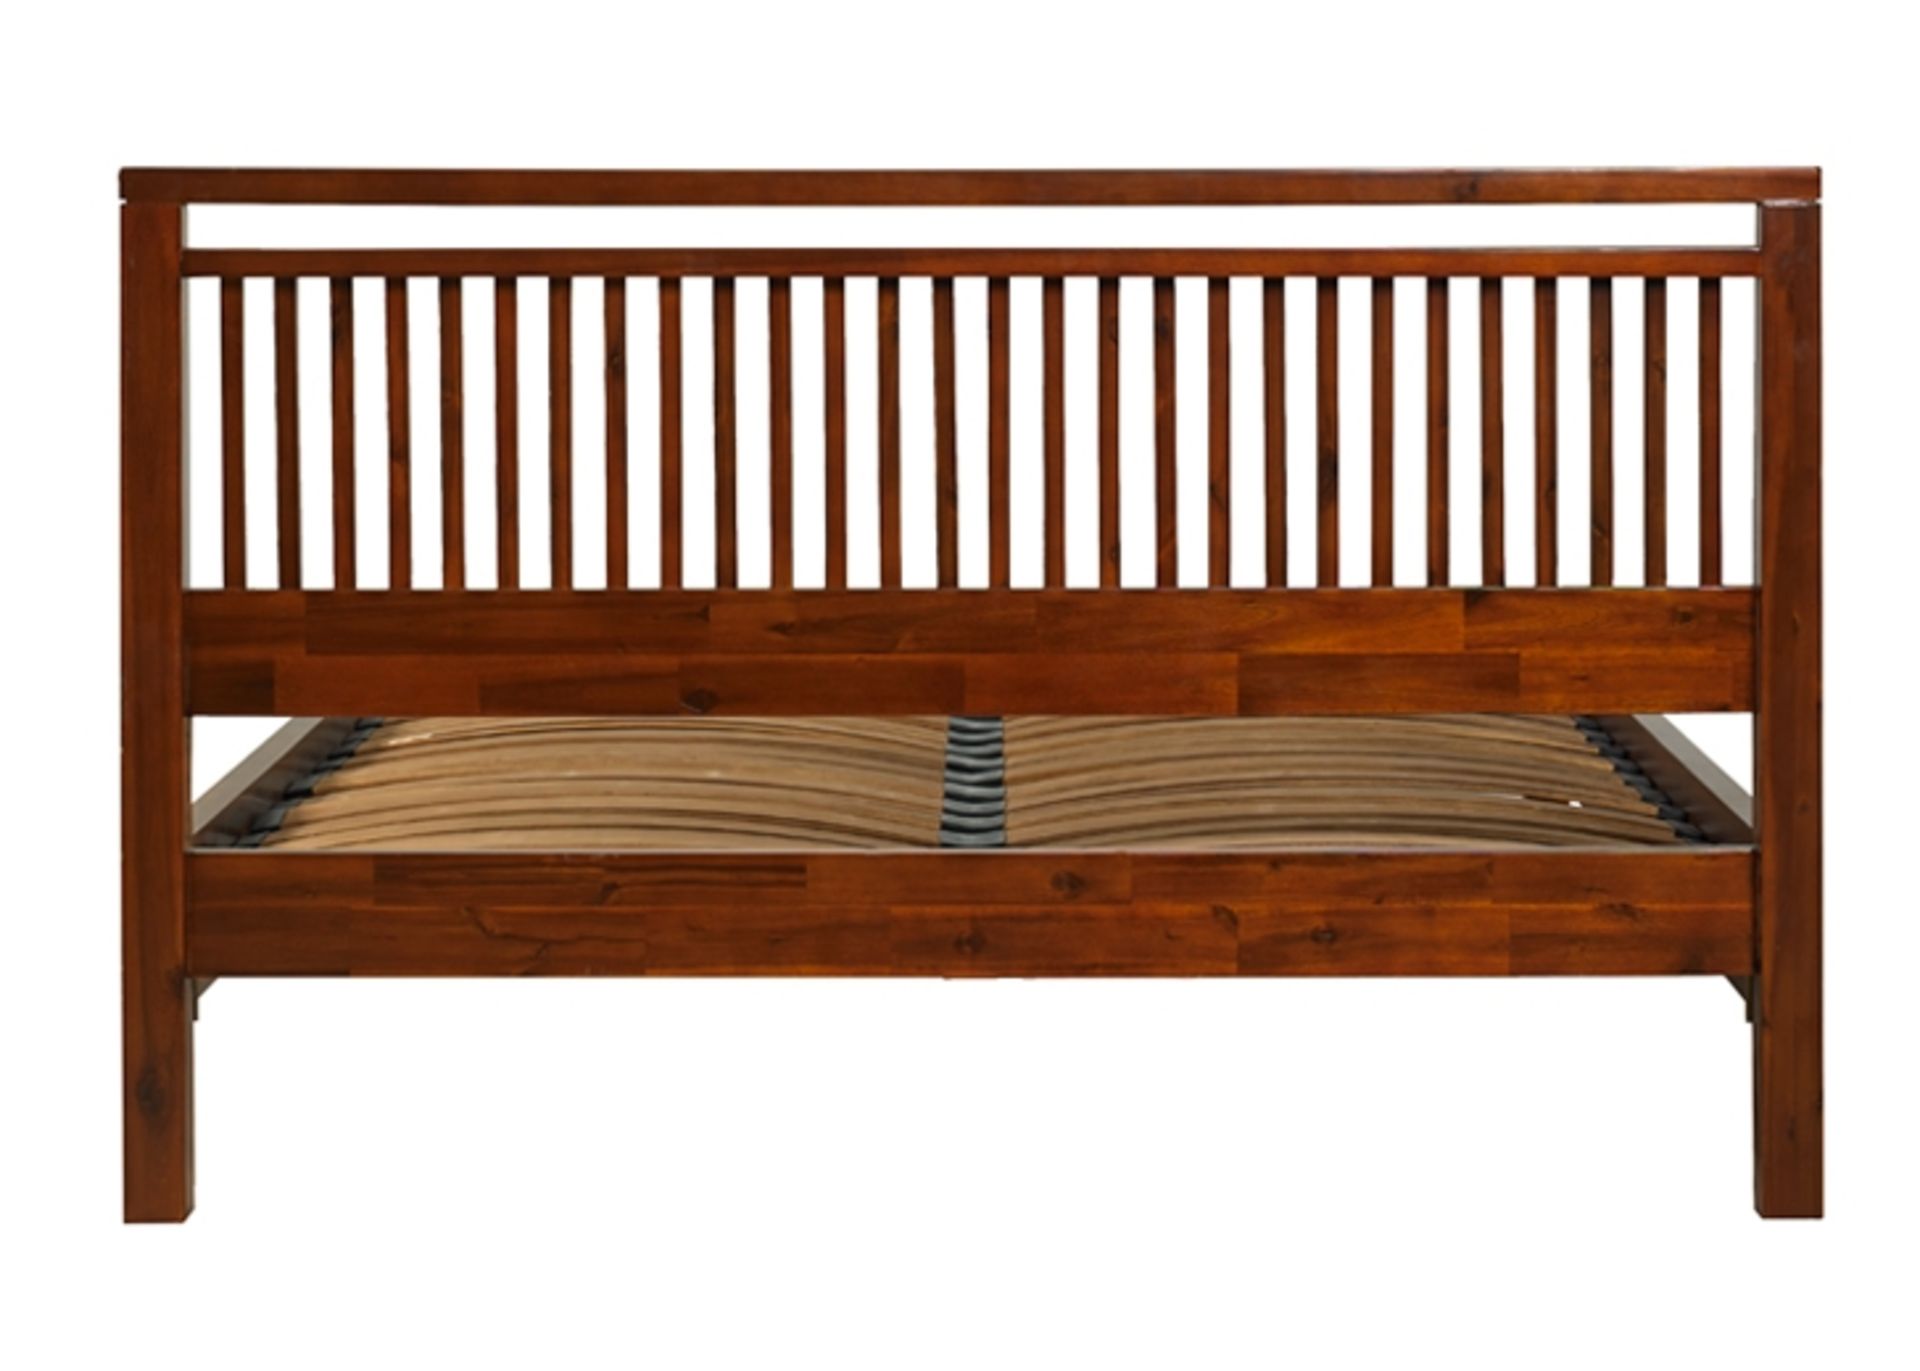 1 x Mark Webster Korutla 6ft King Size Bed Frame - Beautifully Crafted From Solid Acacia Wood - - Image 2 of 4